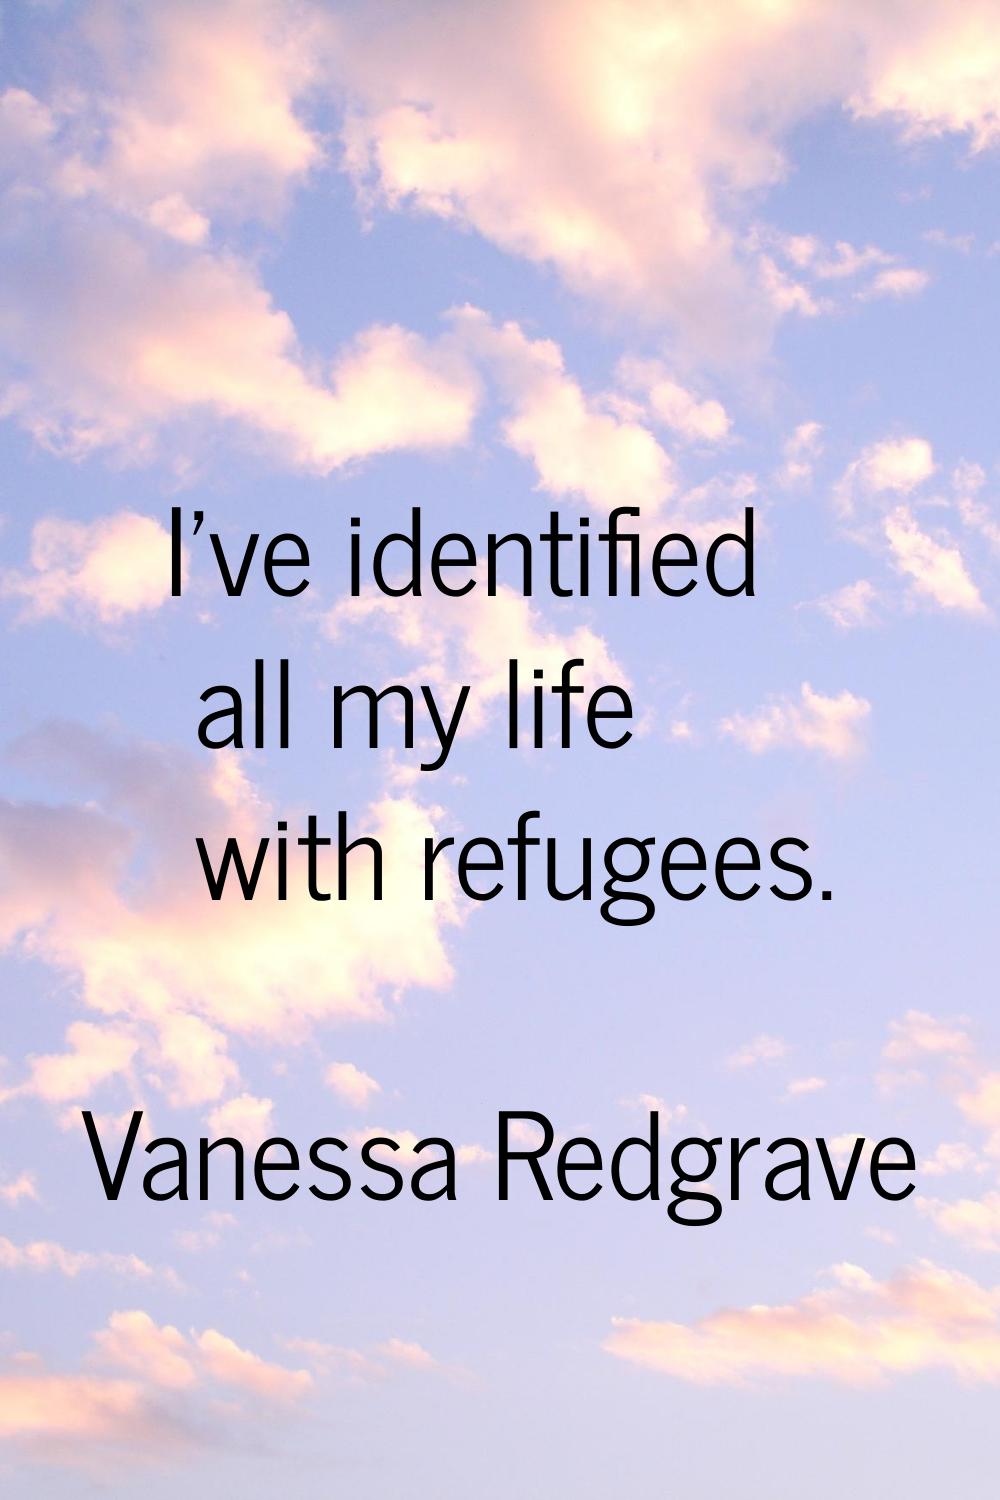 I've identified all my life with refugees.